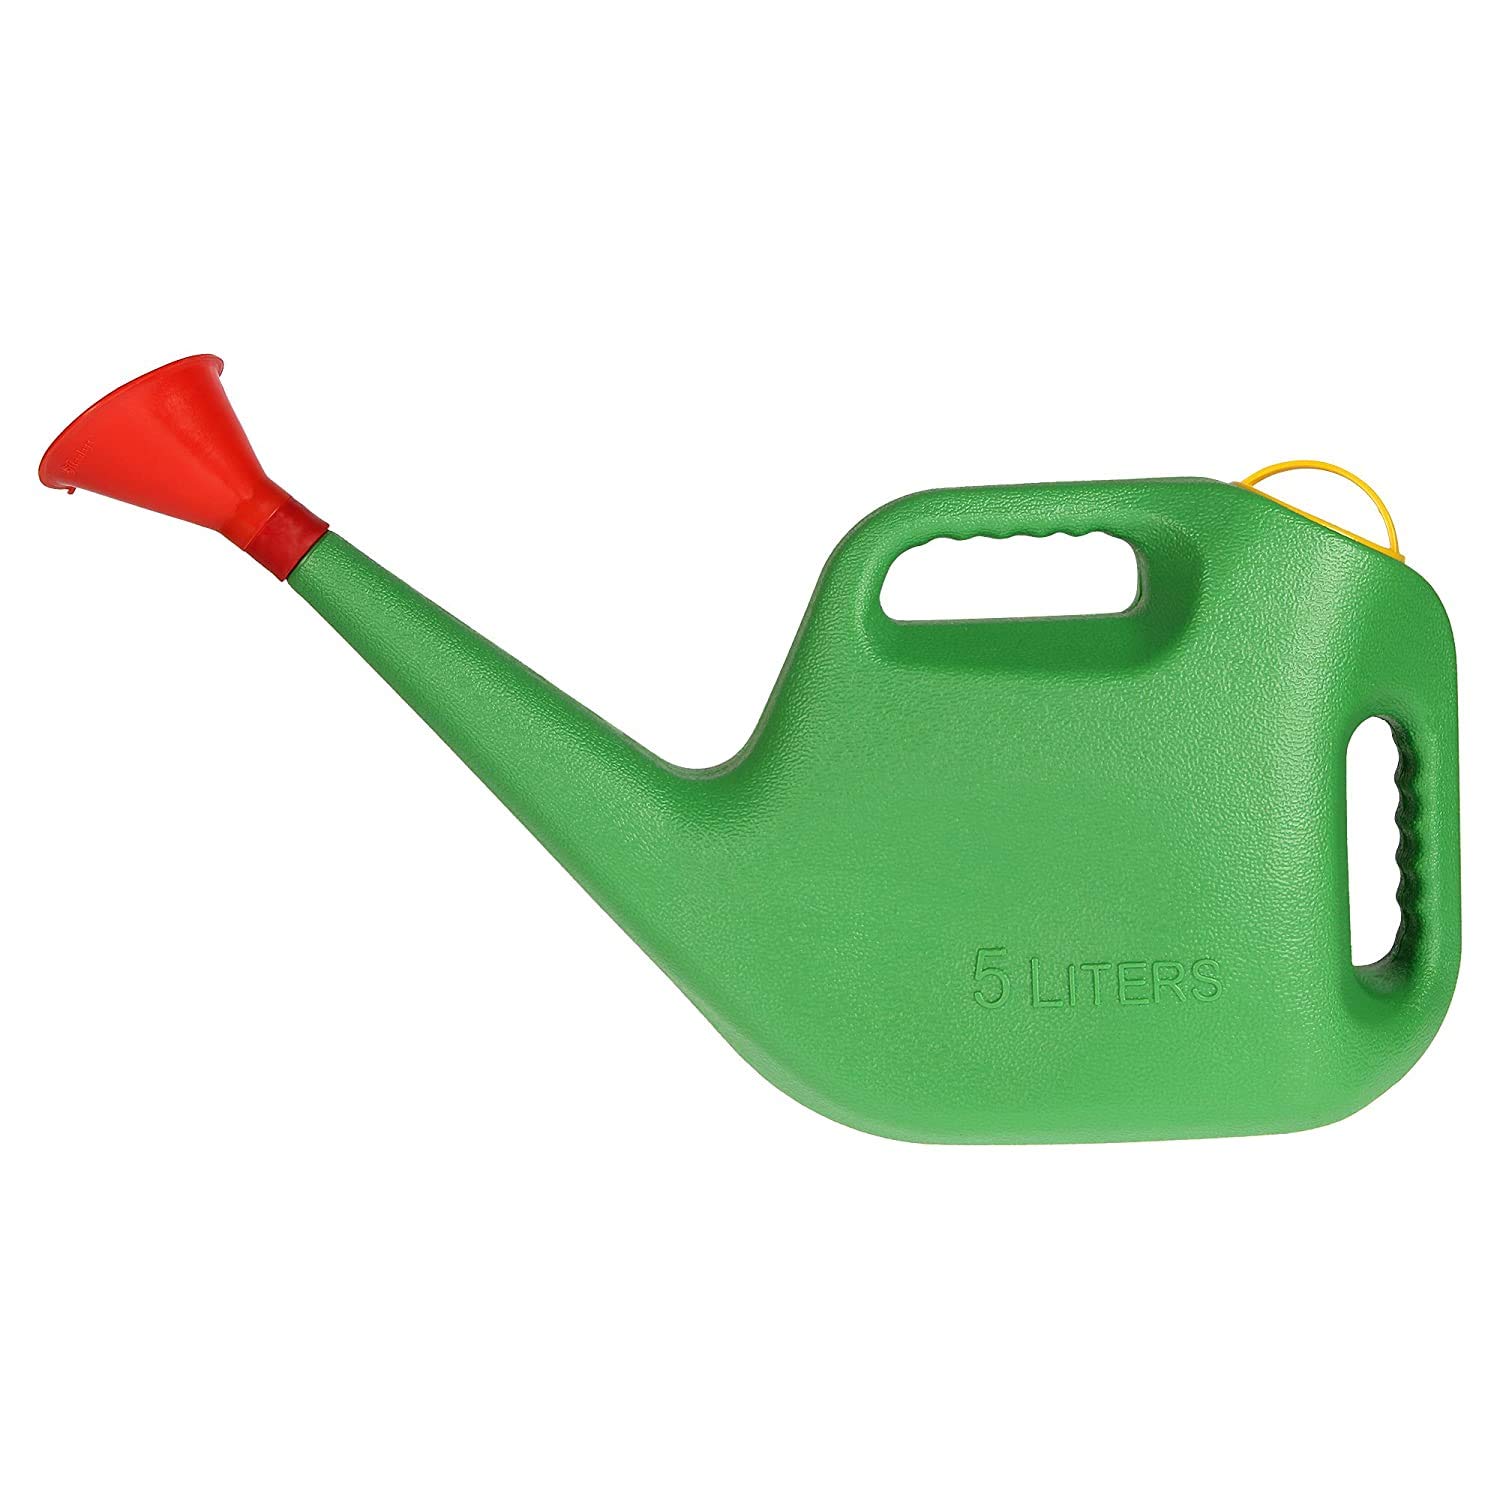 5L Plastic Green Watering Can with Sprayer for Plants/Garden | Indoor Outdoor Watering Can | Sprinkler for Plants Seed Germination | Hand Held Sprayer | Watering Wand & Bottles For Garden